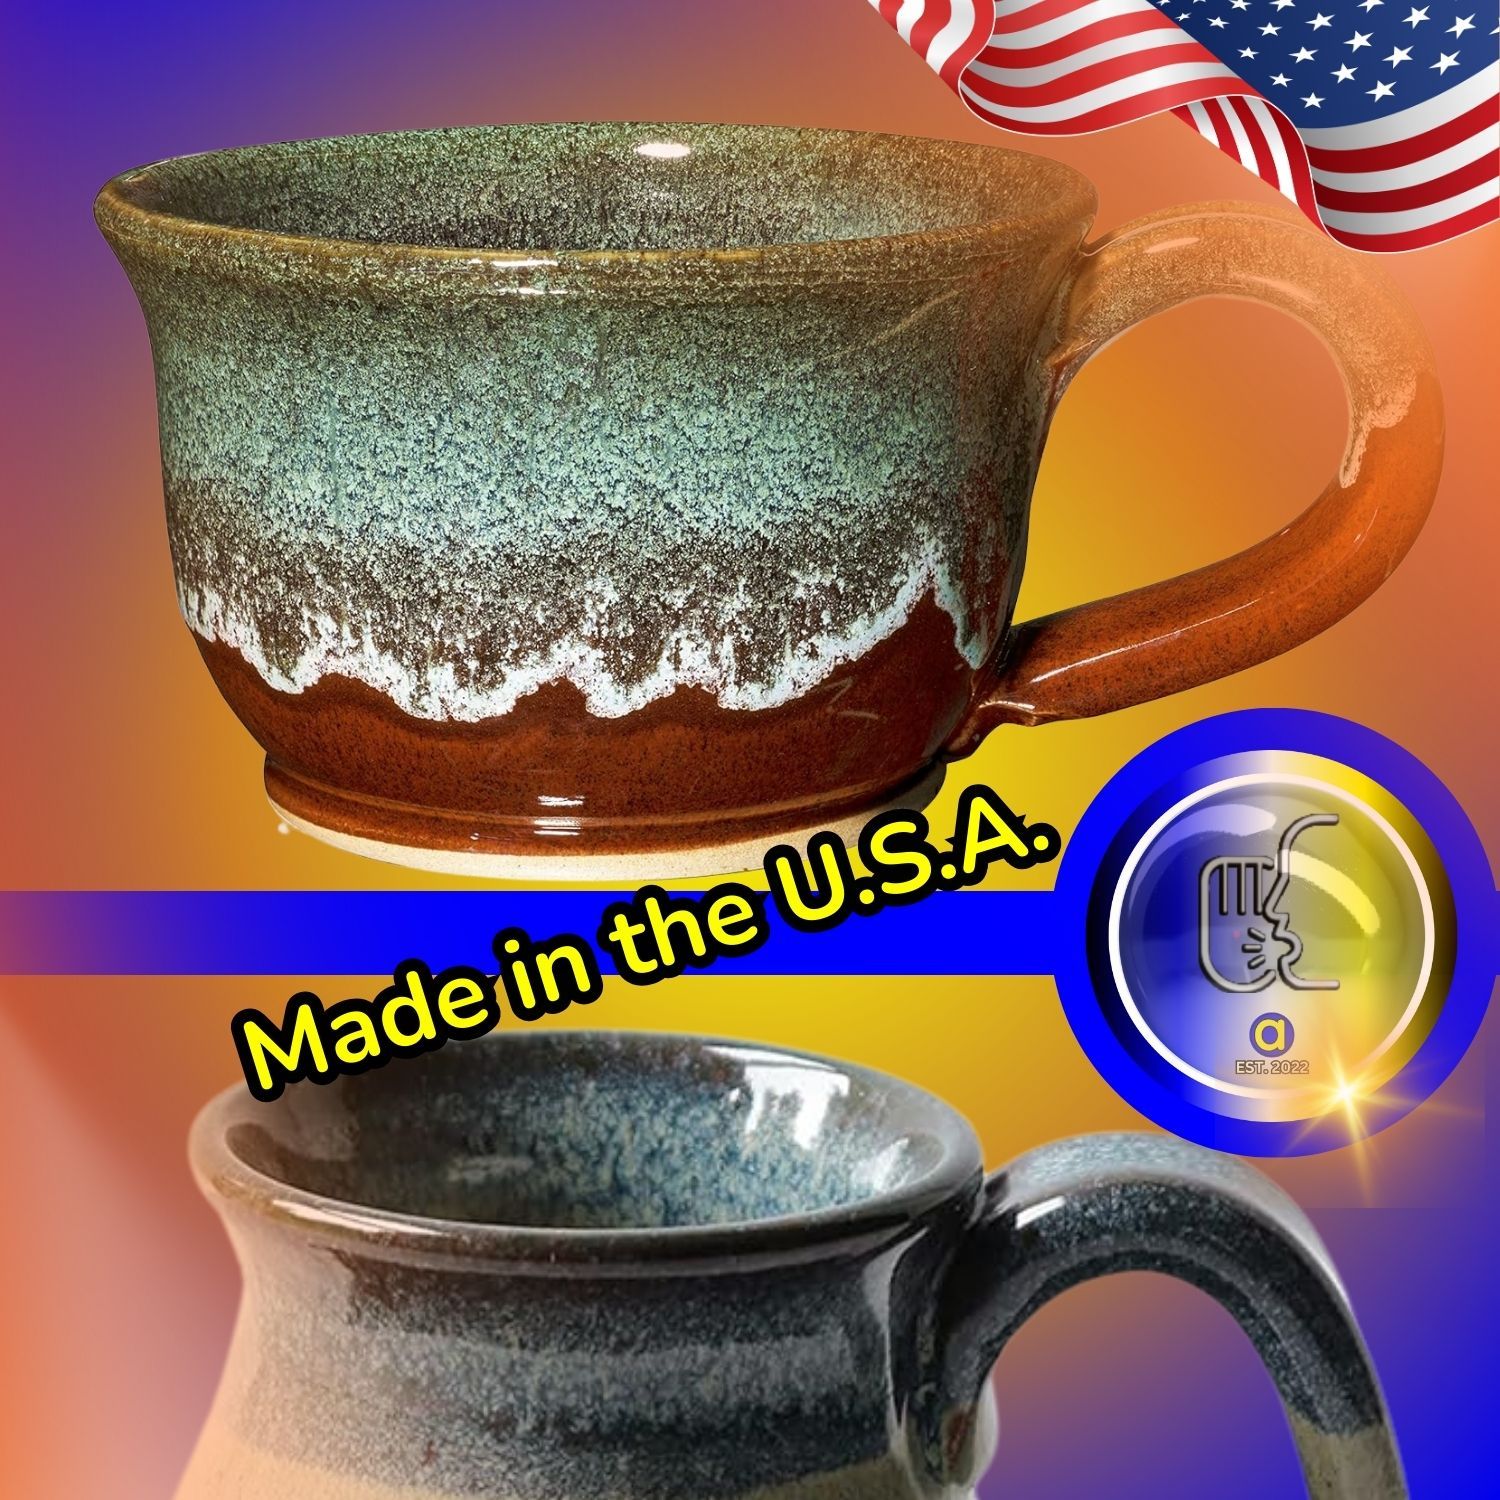 Practice Patriotism with These Coffee Mugs Made in USA